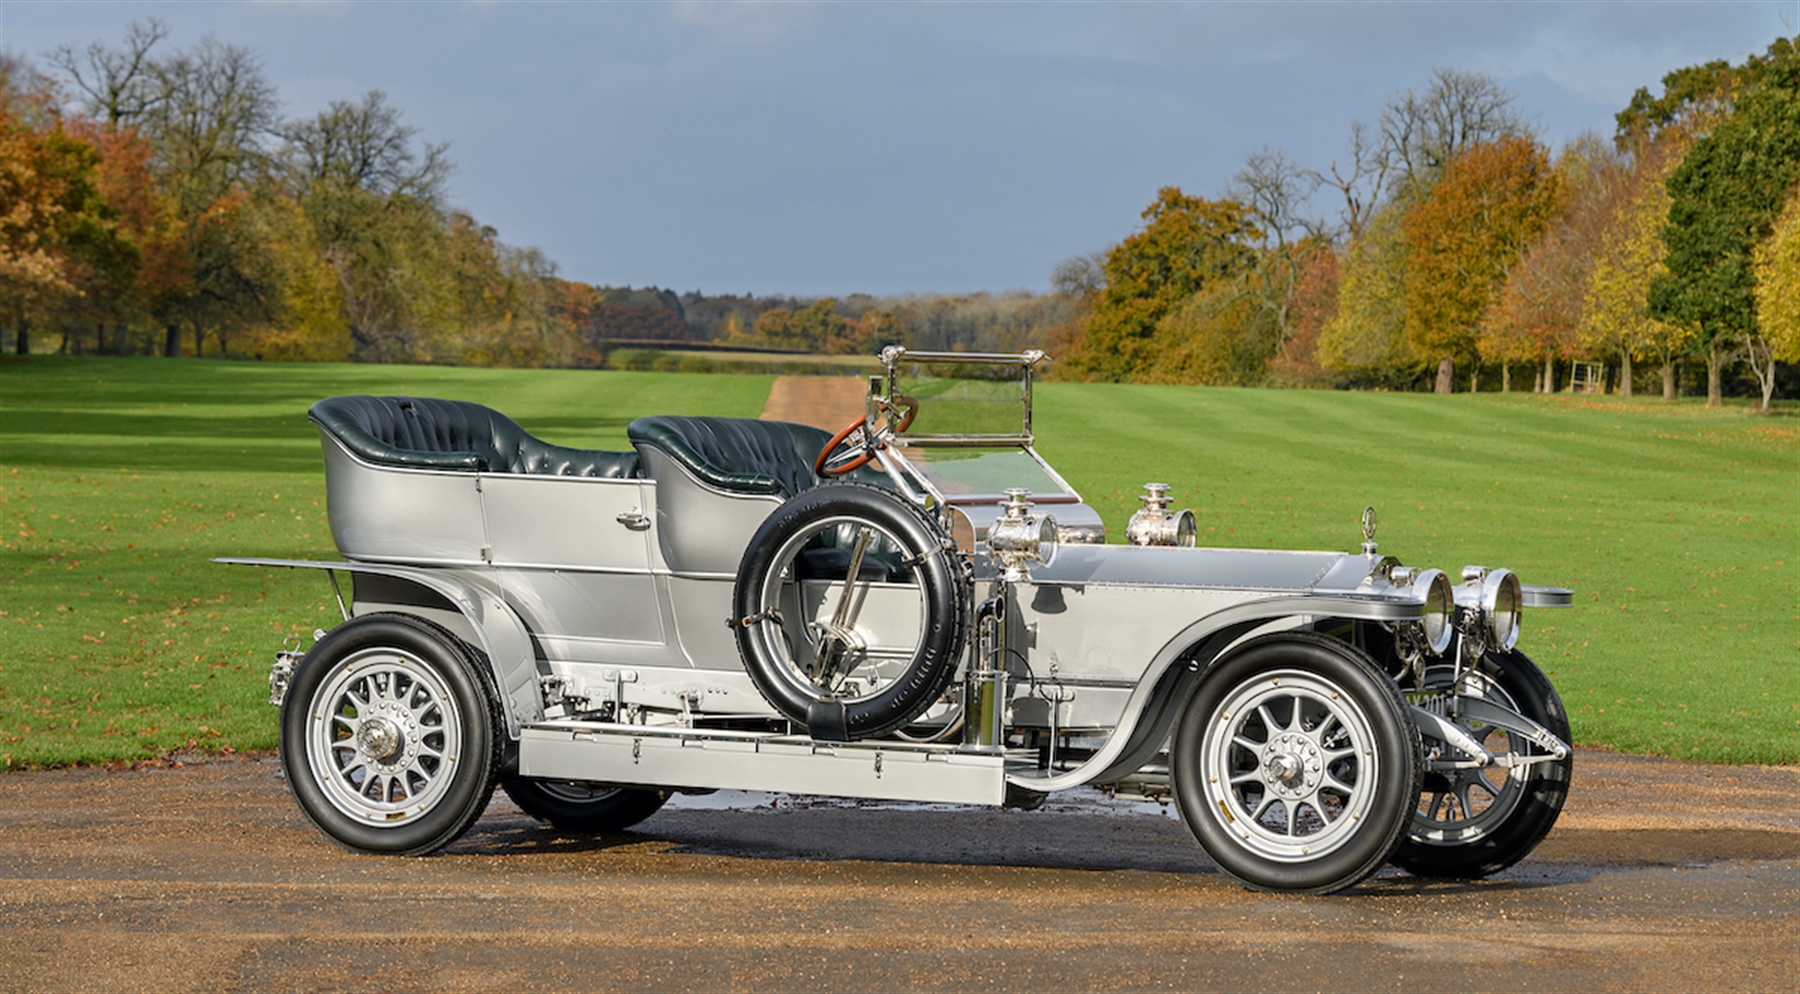 The return of AX201, the original Rolls-Royce Silver Ghost - Magneto